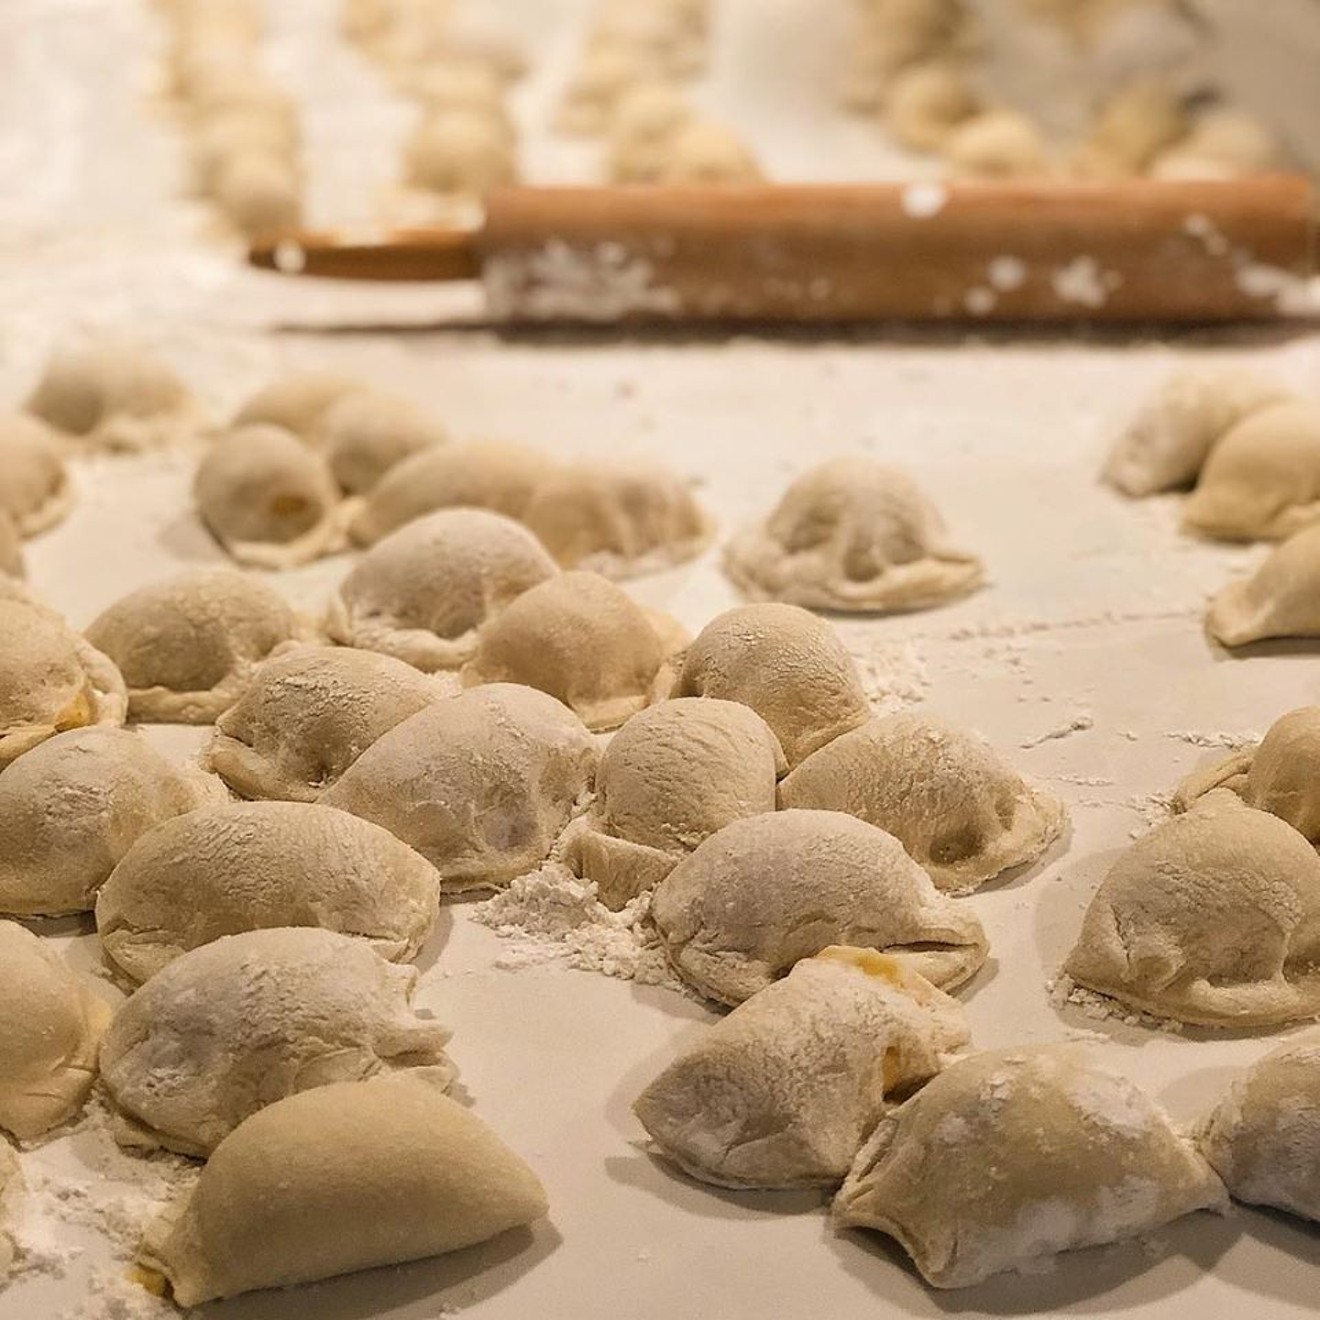 Baba & Pop's will soon be serving its handmade pierogies in a permanent setting.